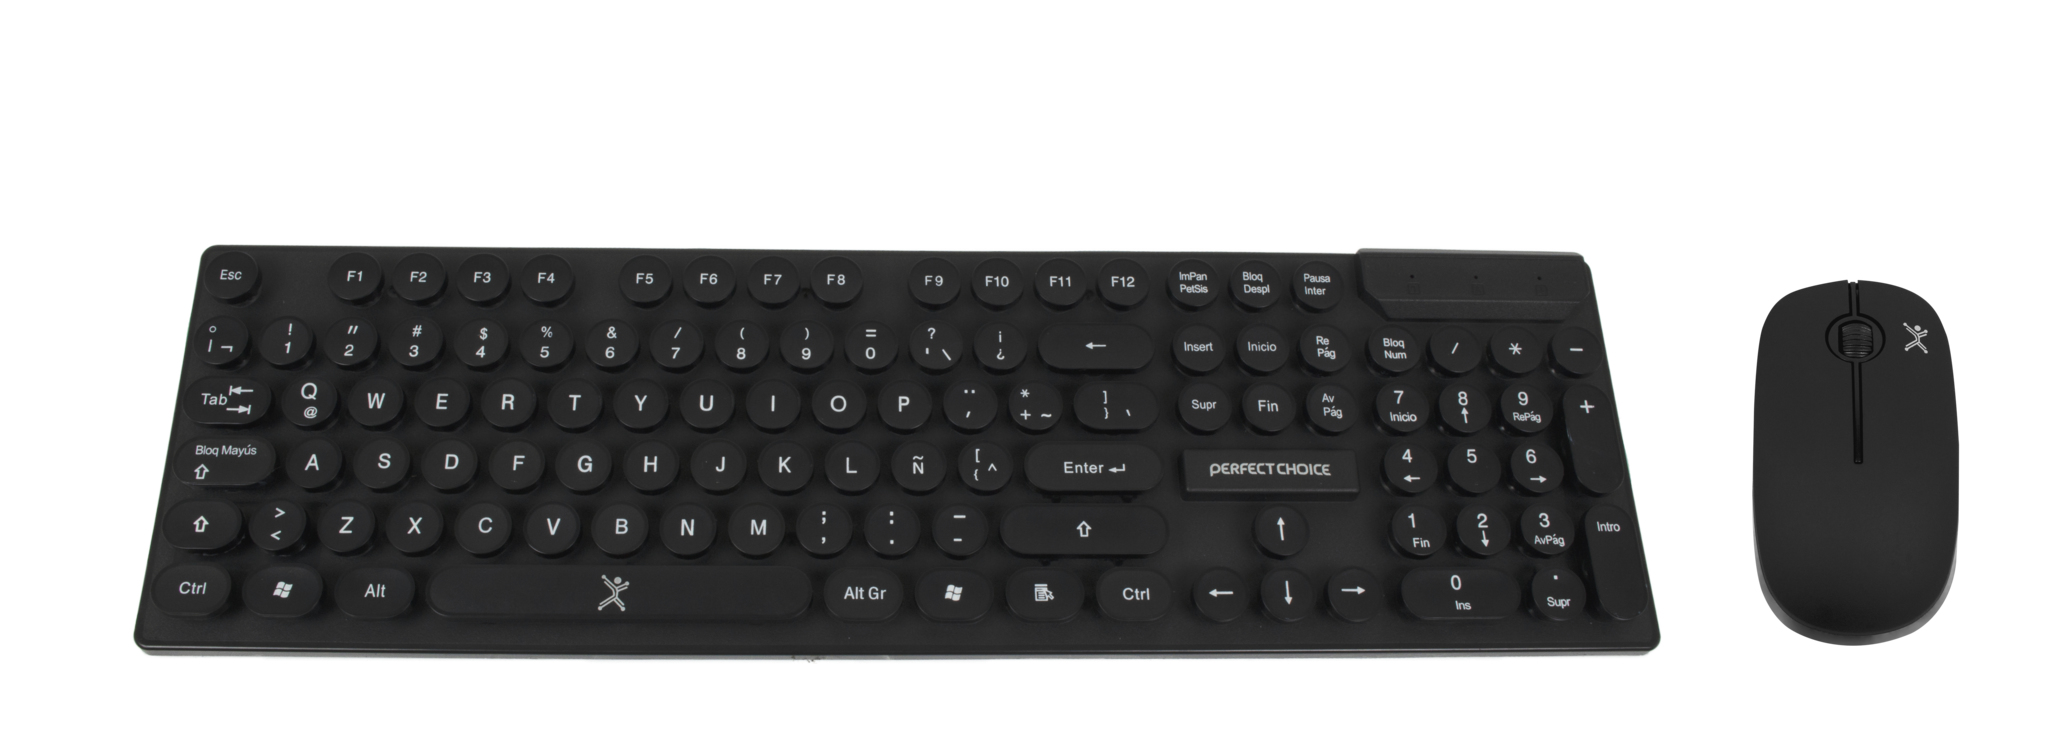 Kit Teclado Y Mouse Inal Perfect Choice Pc-201052 Sp Negro 1000 Dpi